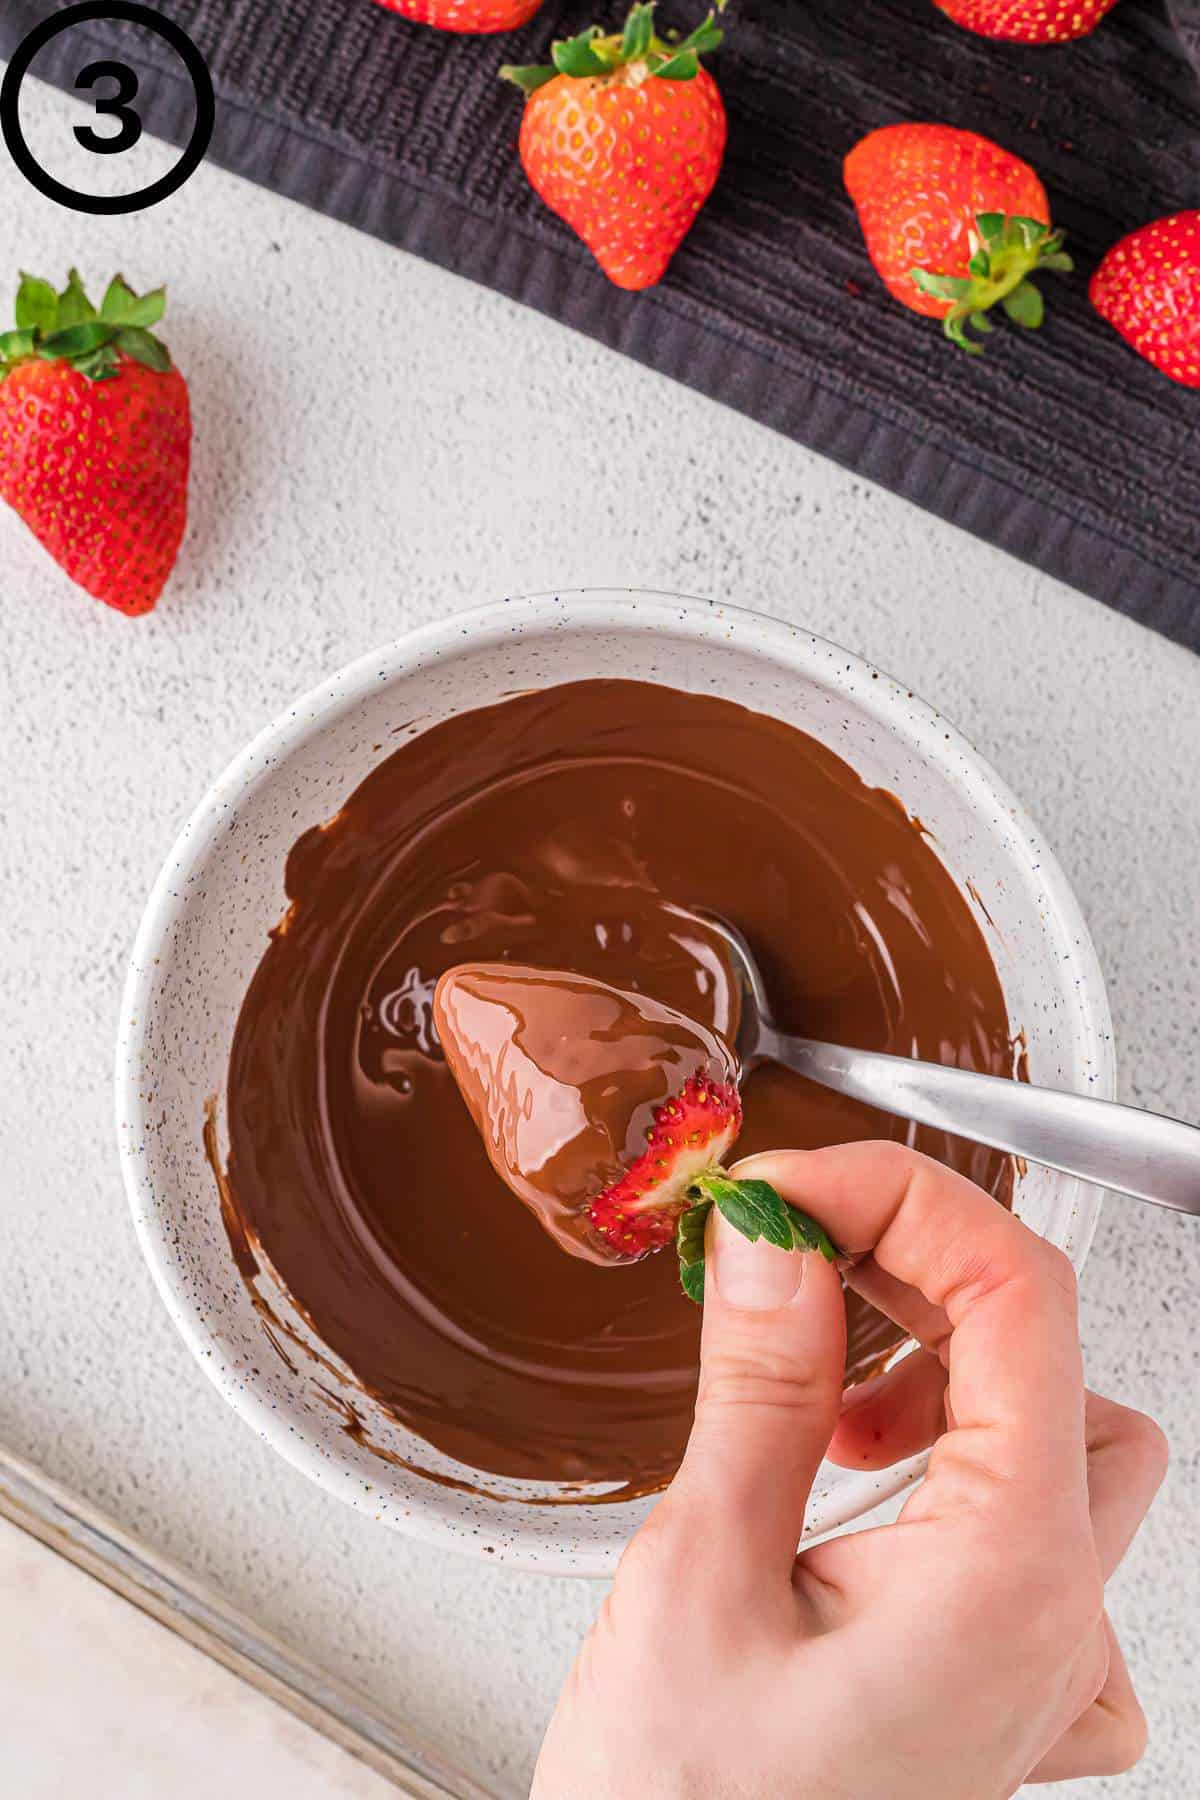 Dipping a strawberry into melted vegan chocolate.